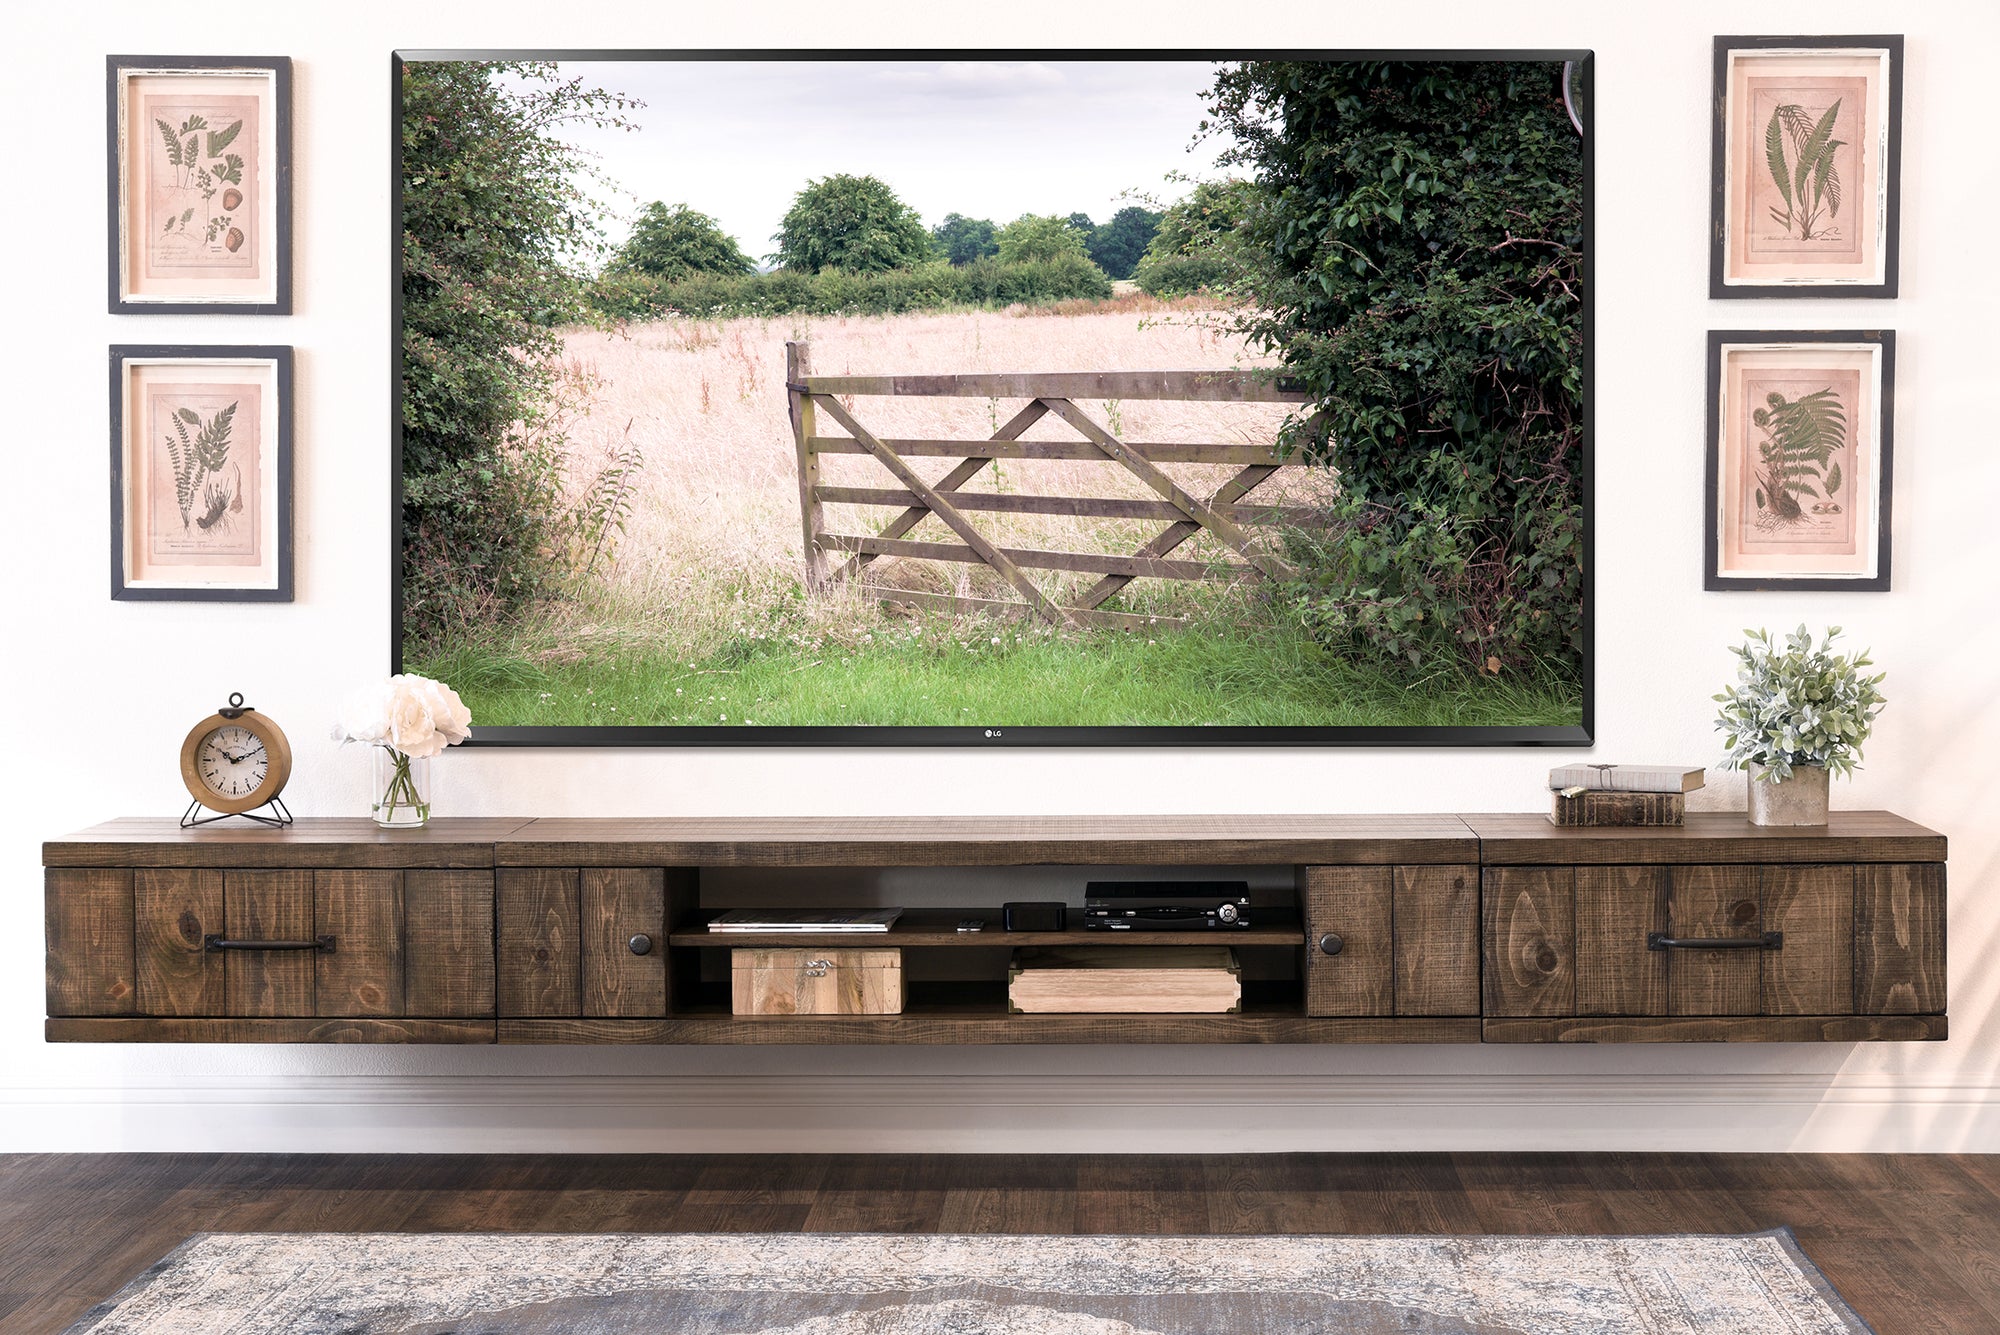 Farmhouse Rustic Wood Floating TV Stand Entertainment Center - Spice